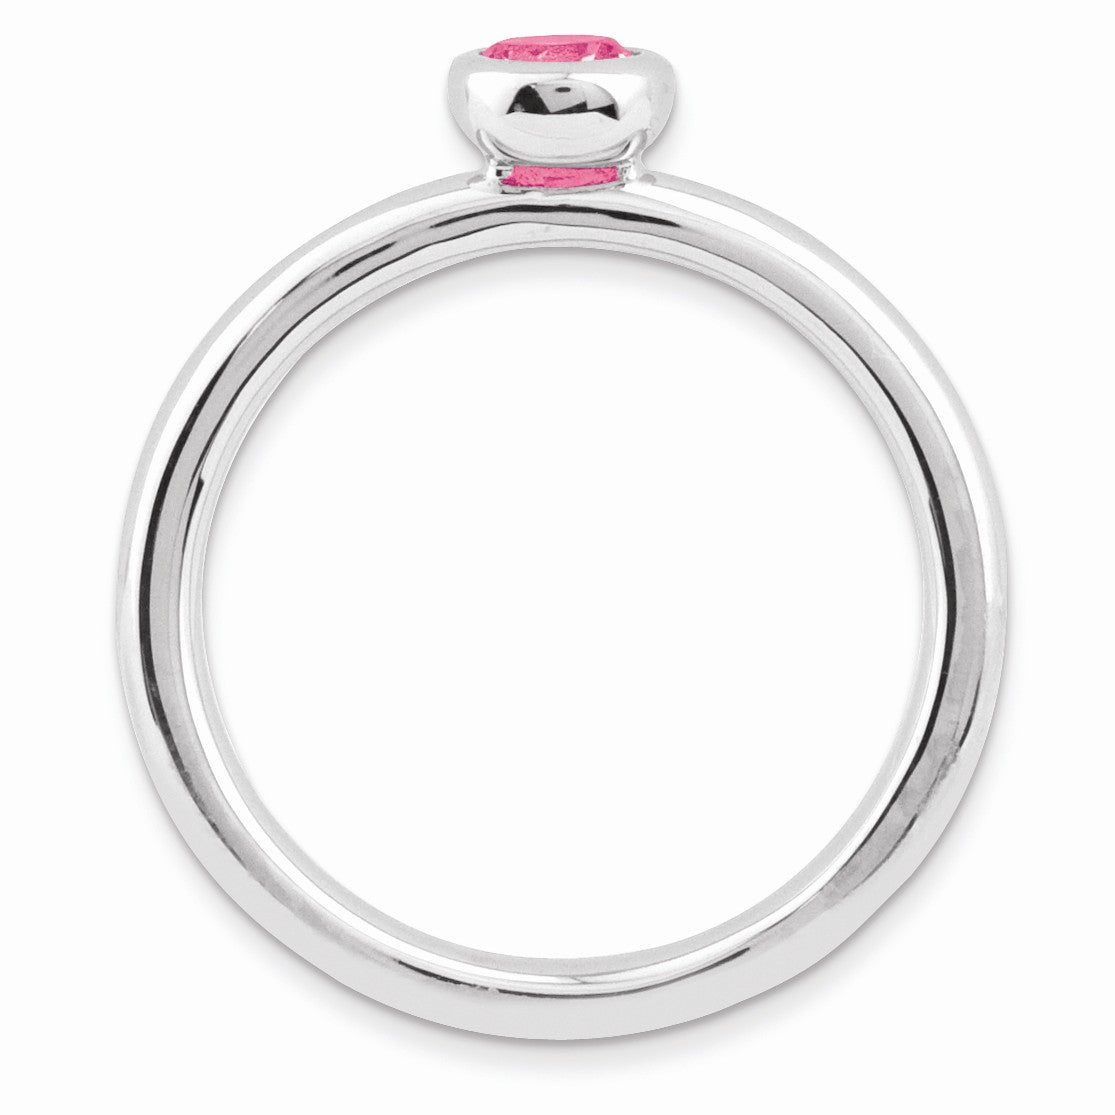 Alternate view of the Stackable Low Profile 4mm Pink Tourmaline Silver Ring by The Black Bow Jewelry Co.